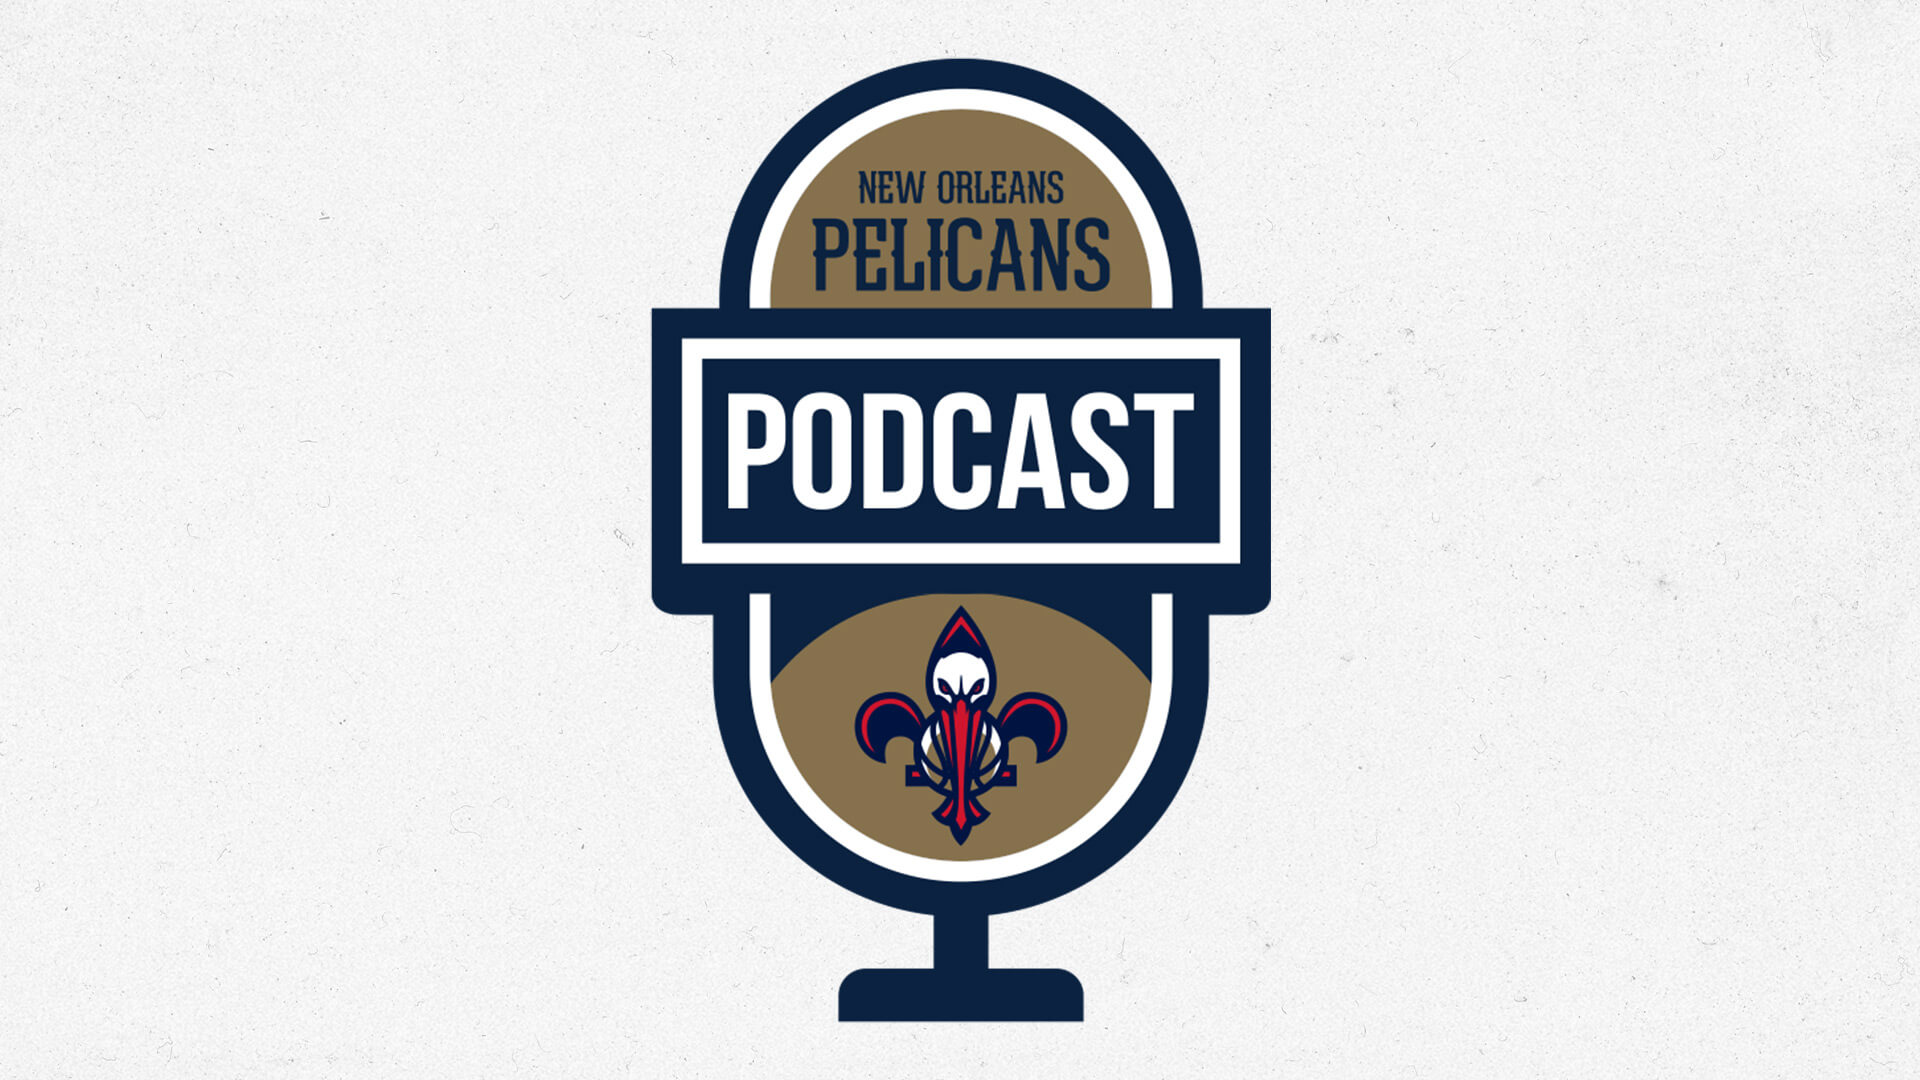 Pelicans playoff push: road wins and NBA playoff scenarios | Pelicans Podcast